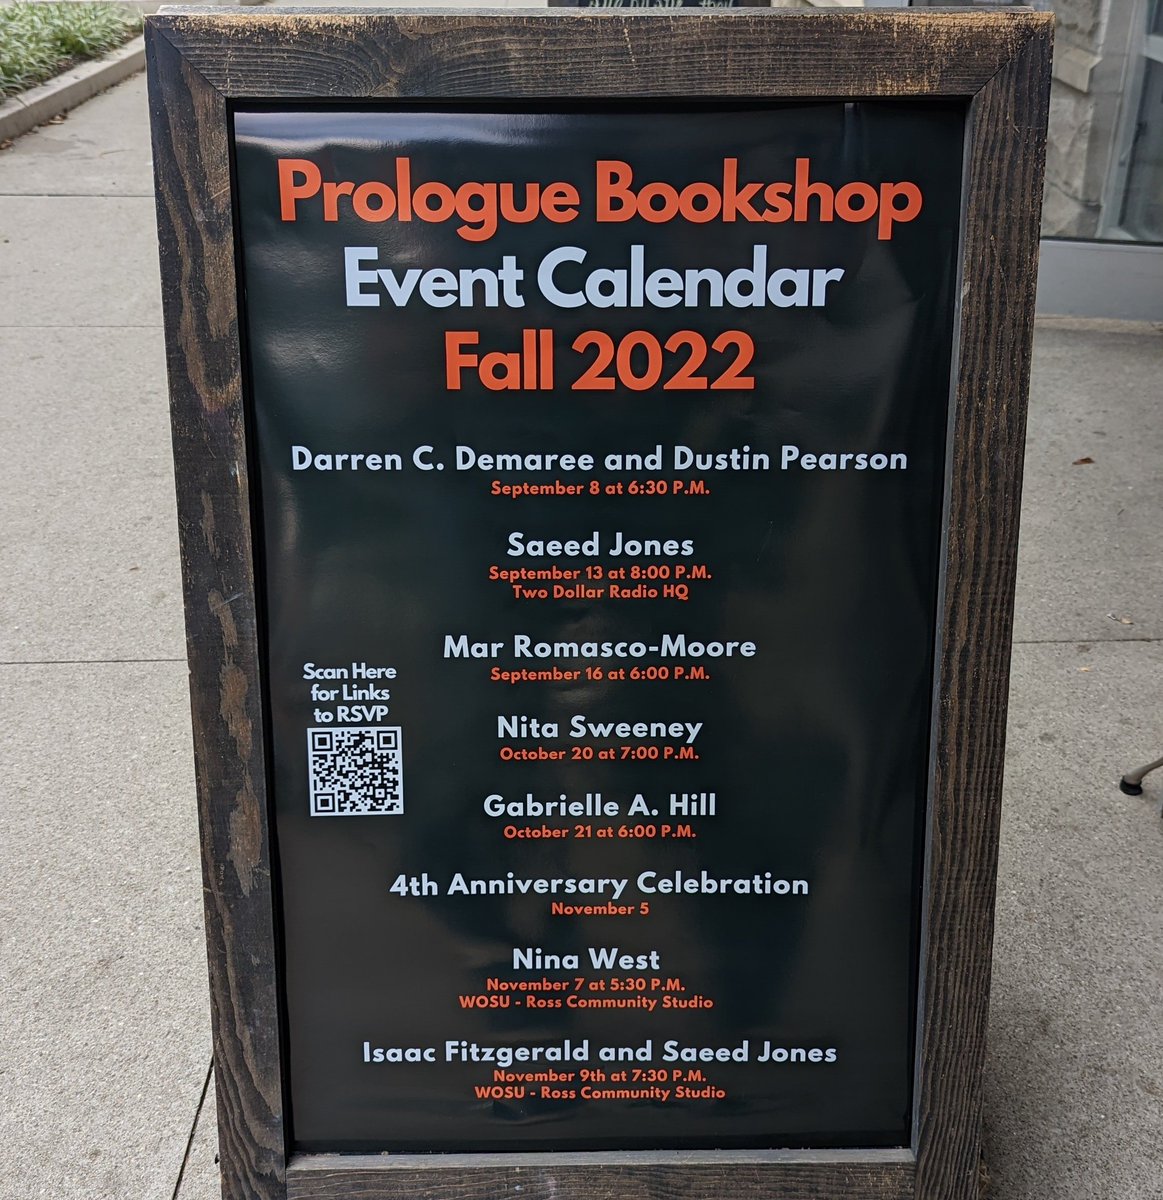 We've got an incredible set of events coming up this fall, hope you can join us! RSVP at prologuebookshop.com/events.